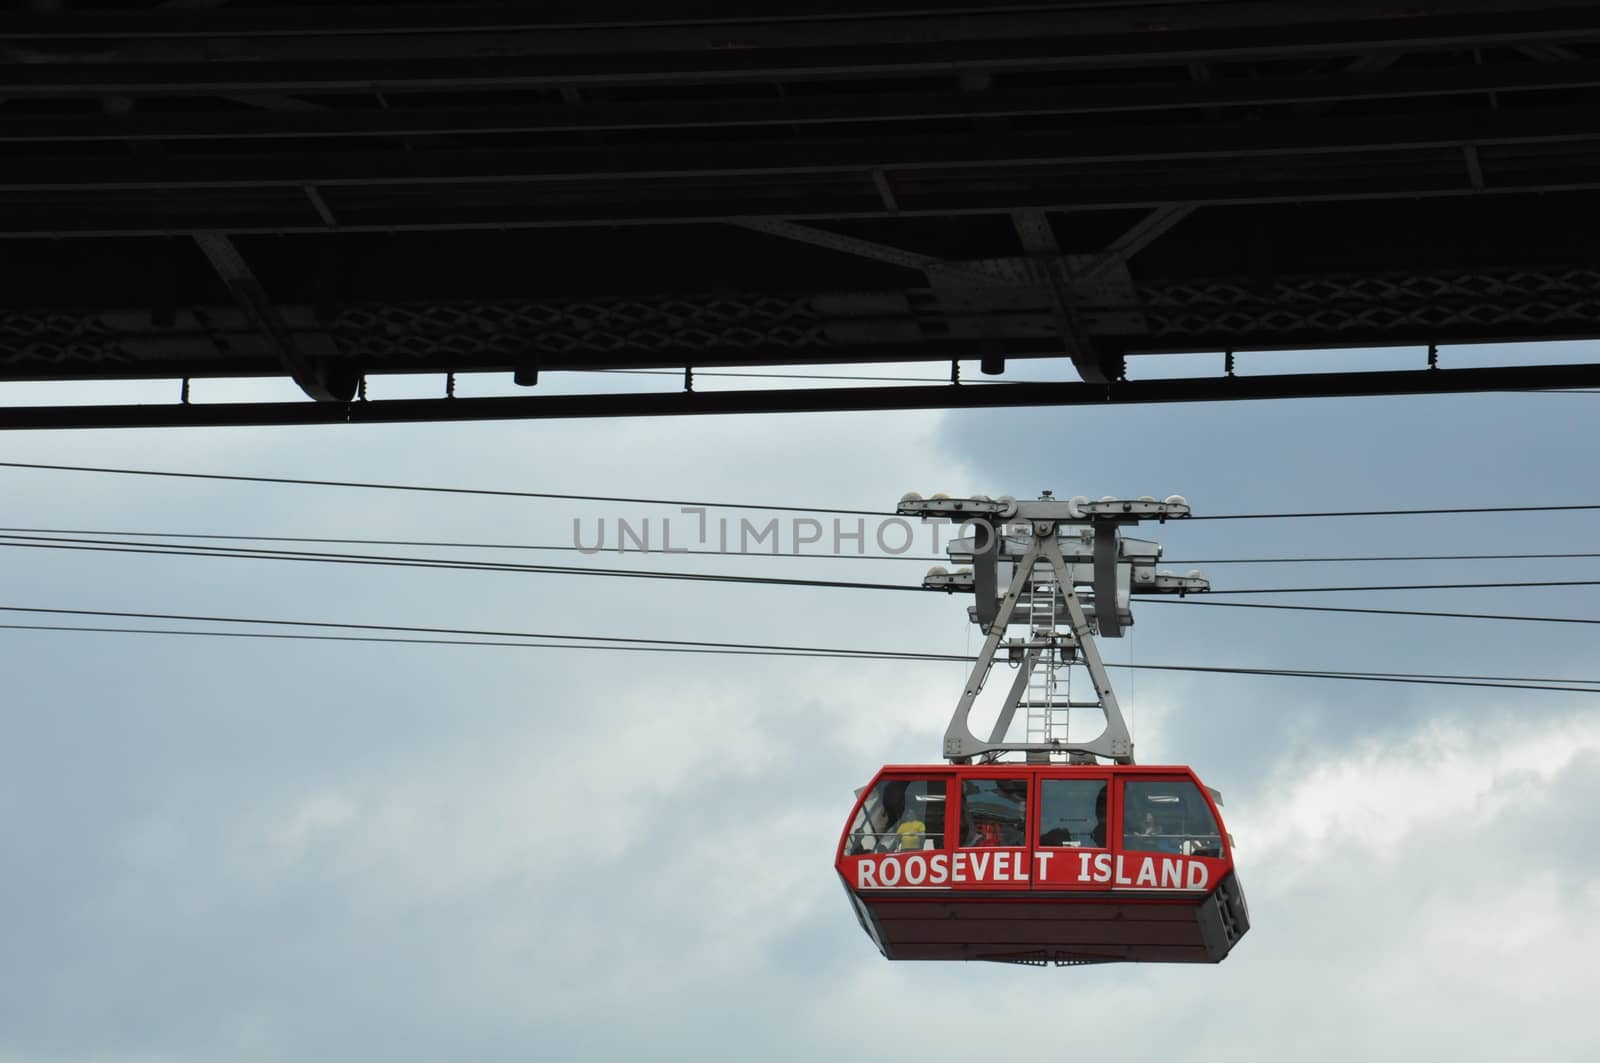 Roosevelt Island cable tram car that connects Roosevelt Island to Manhattan in New York